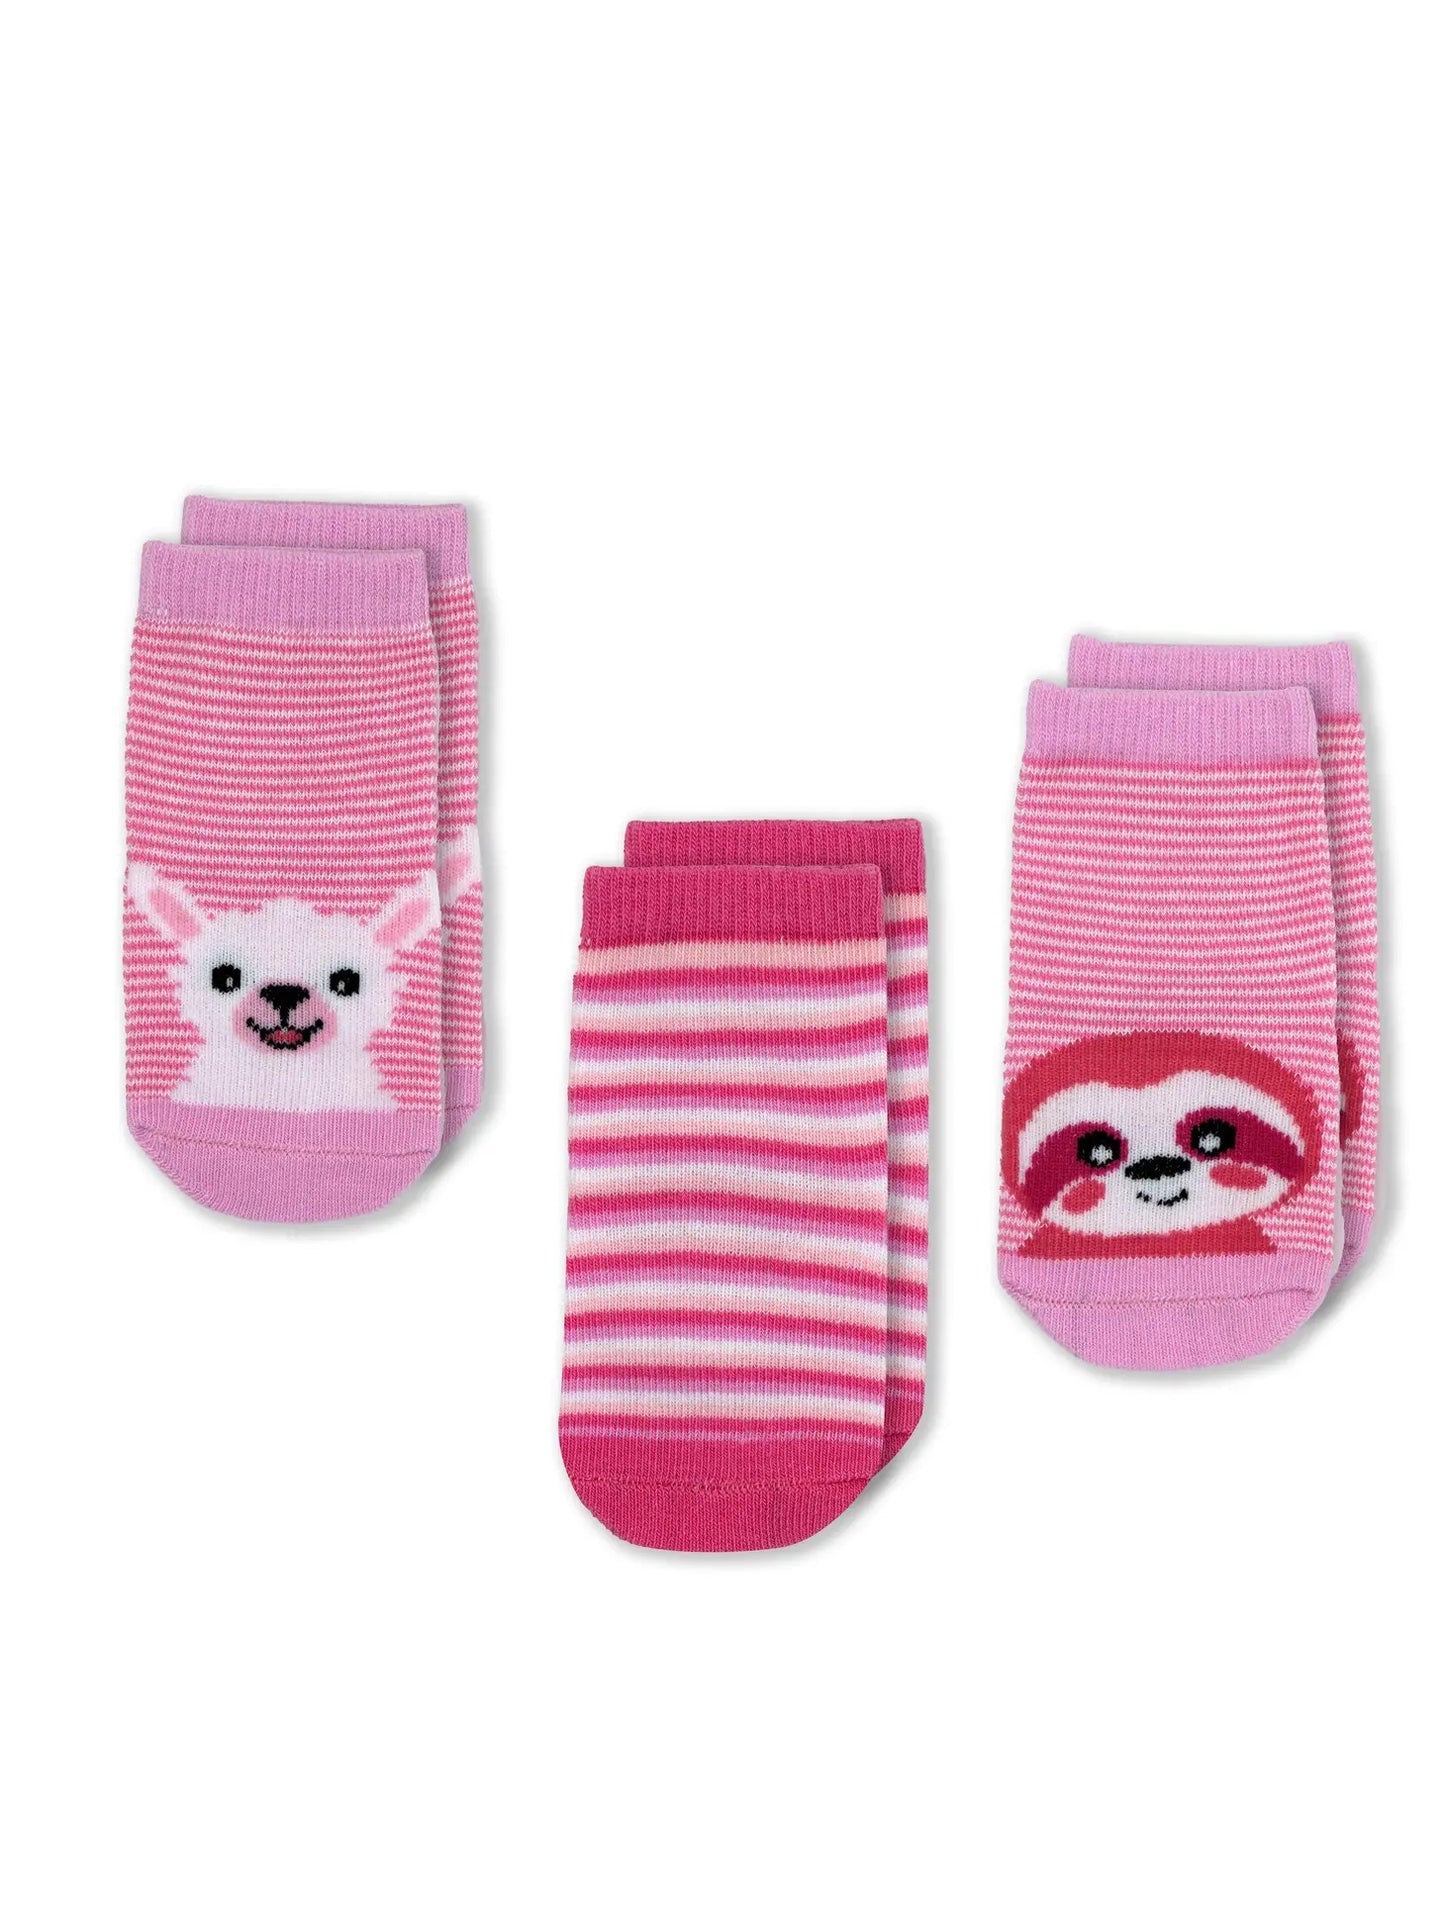 Rose Textiles 3 Pack Animal Face Socks - Multiple Colors